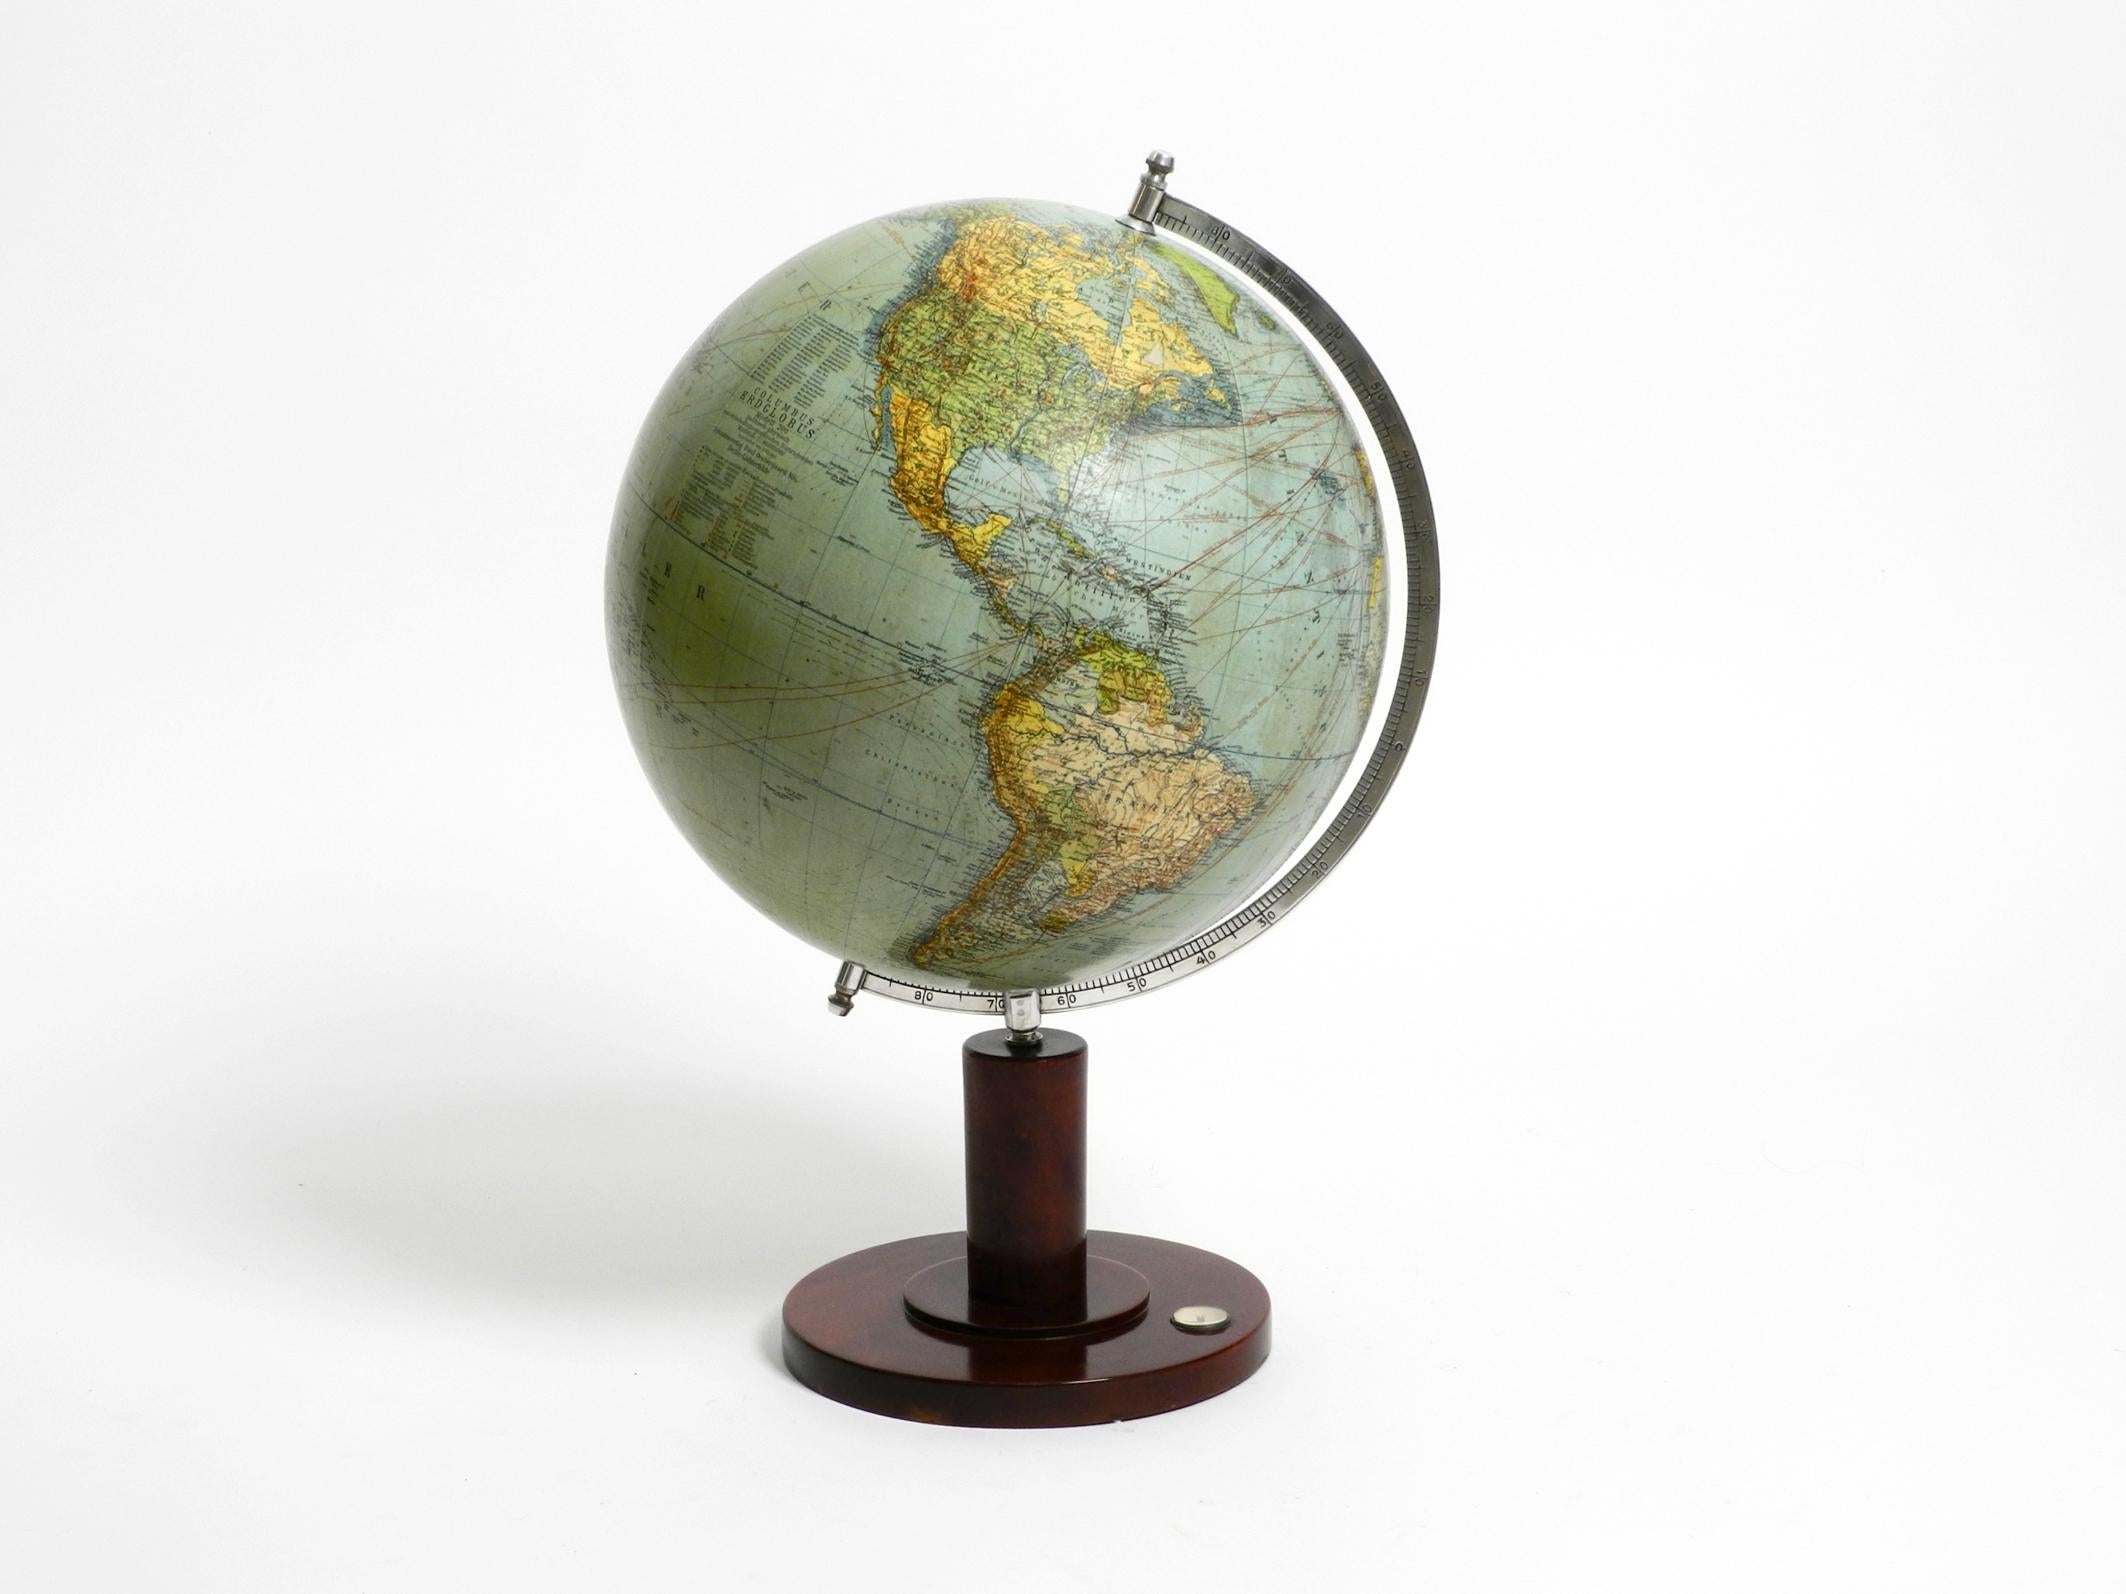 Beautiful 1950s Columbus globe.
Scale 1:40,000,000.
Produced by Columbus Verlag Paul Oestergaard K.G. Berlin and Stuttgart.
Shiny walnut base with a small functioning compass.
The globe is made of bakelite. The axle is made of metal.
The globe is in